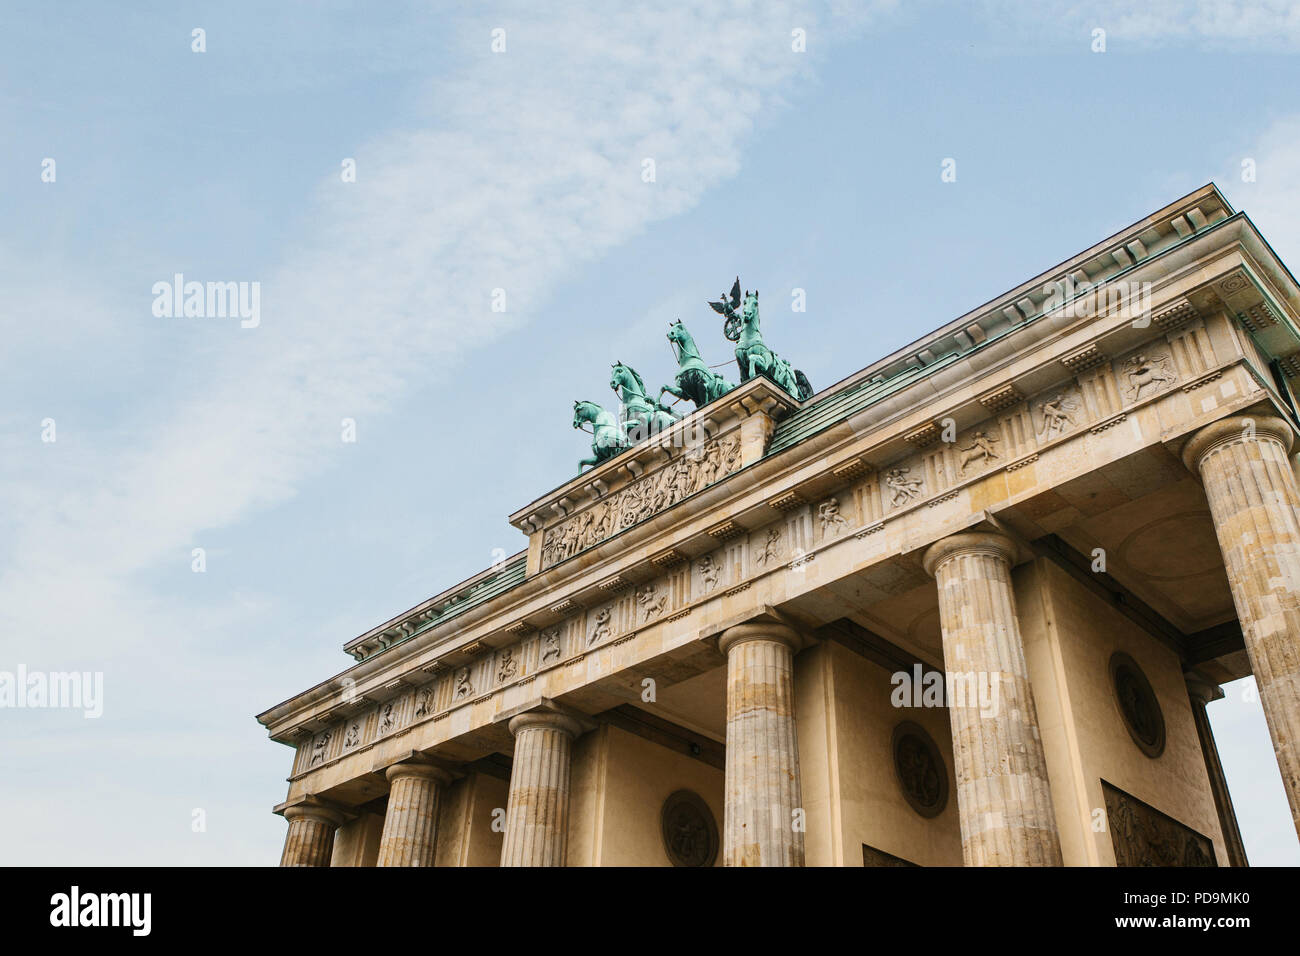 Brandenburg gate in Berlin, Germany. Architectural monument in historic center of Berlin. Symbol and monument of architecture Stock Photo